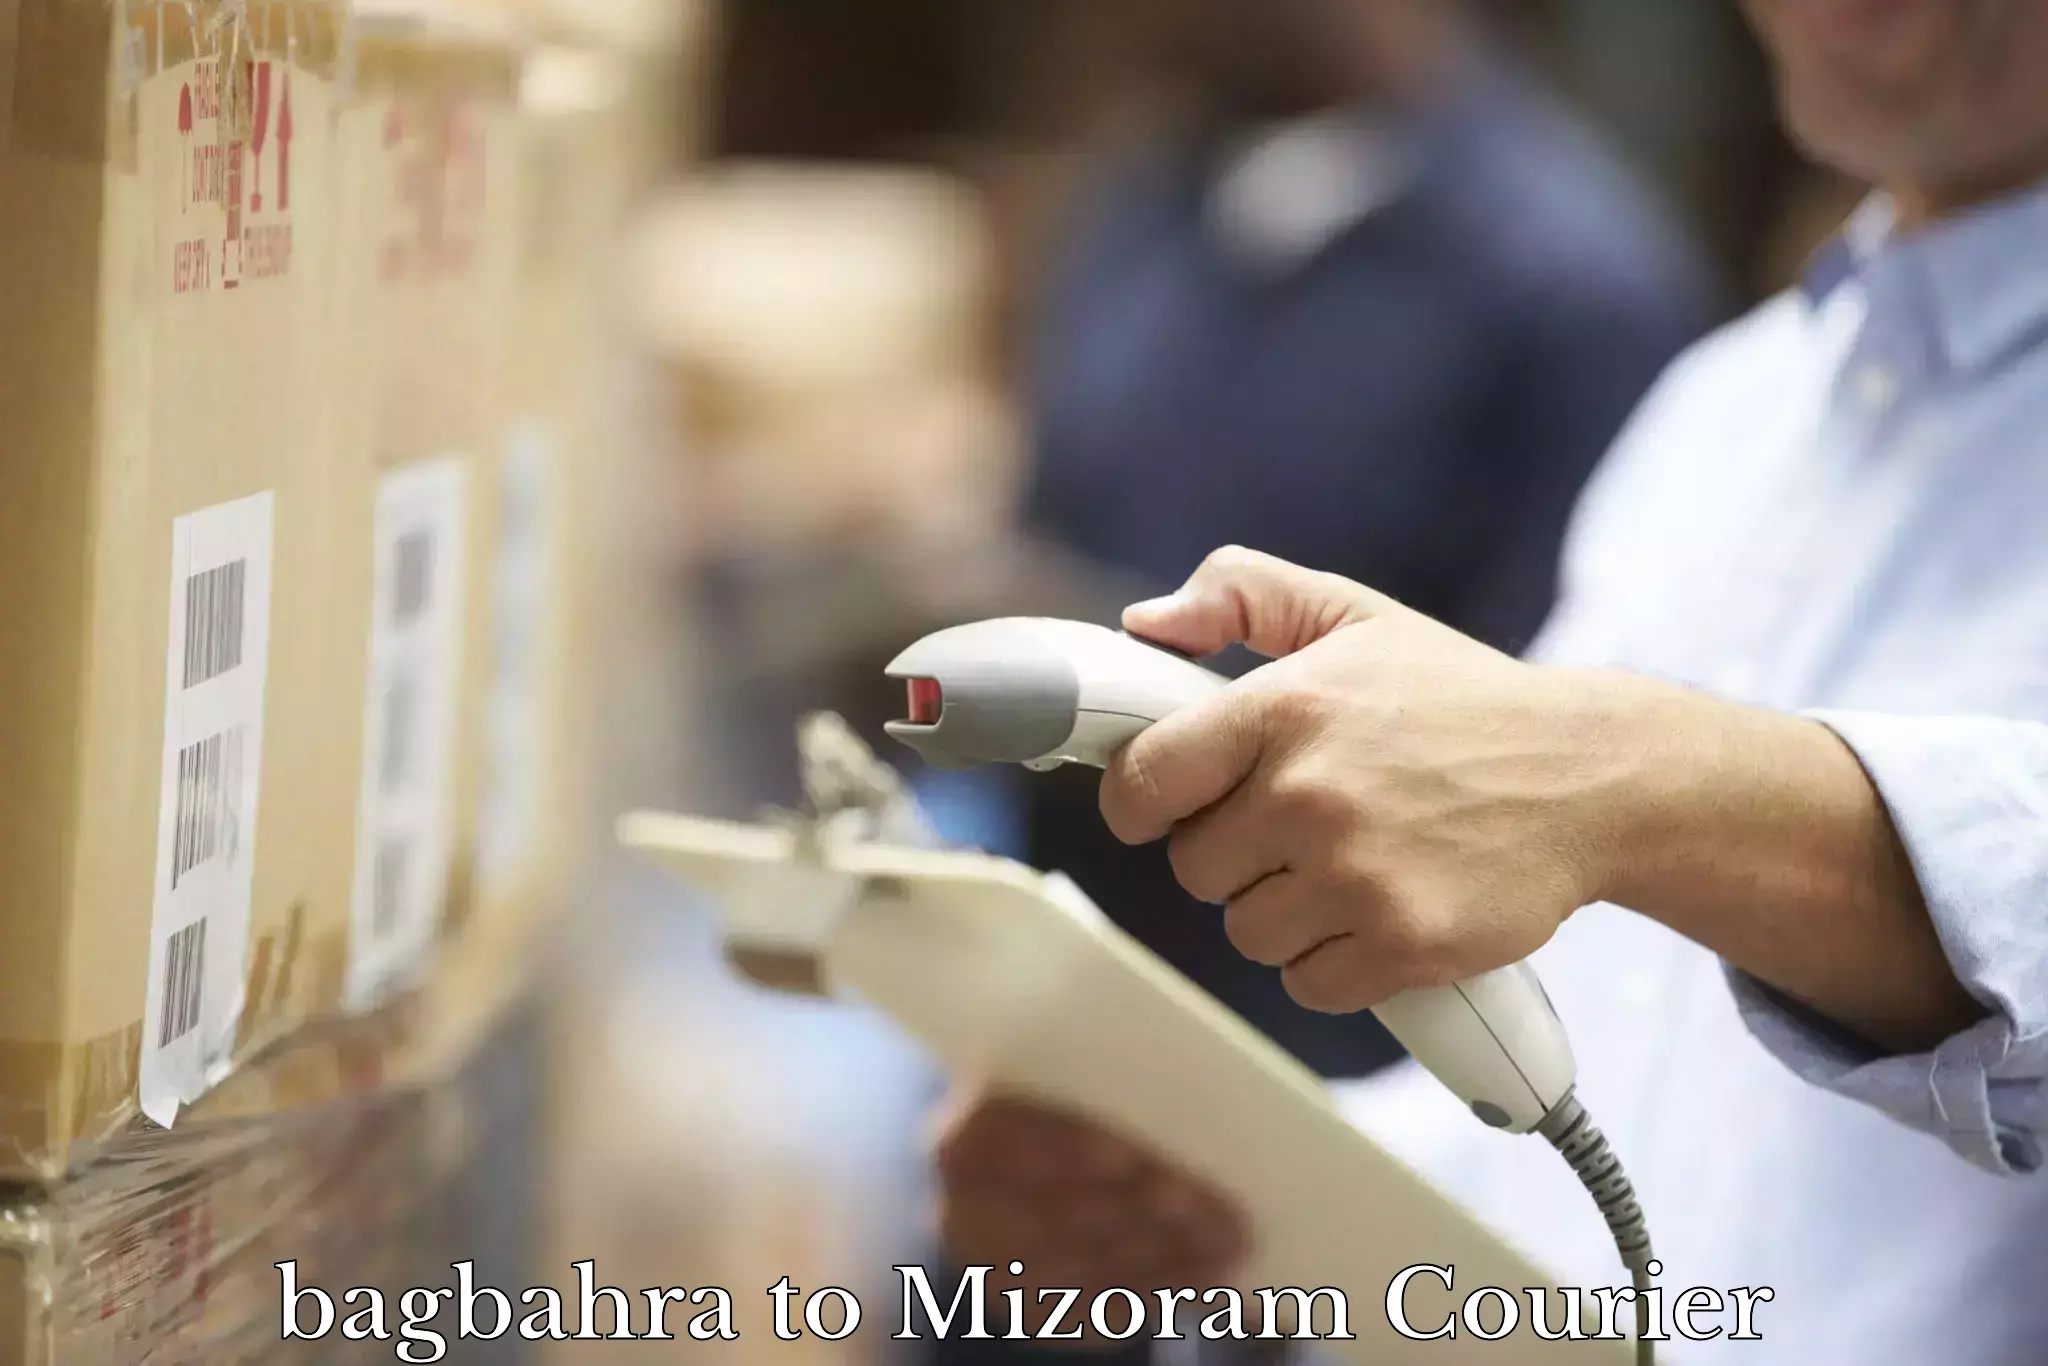 Air courier services bagbahra to Mizoram